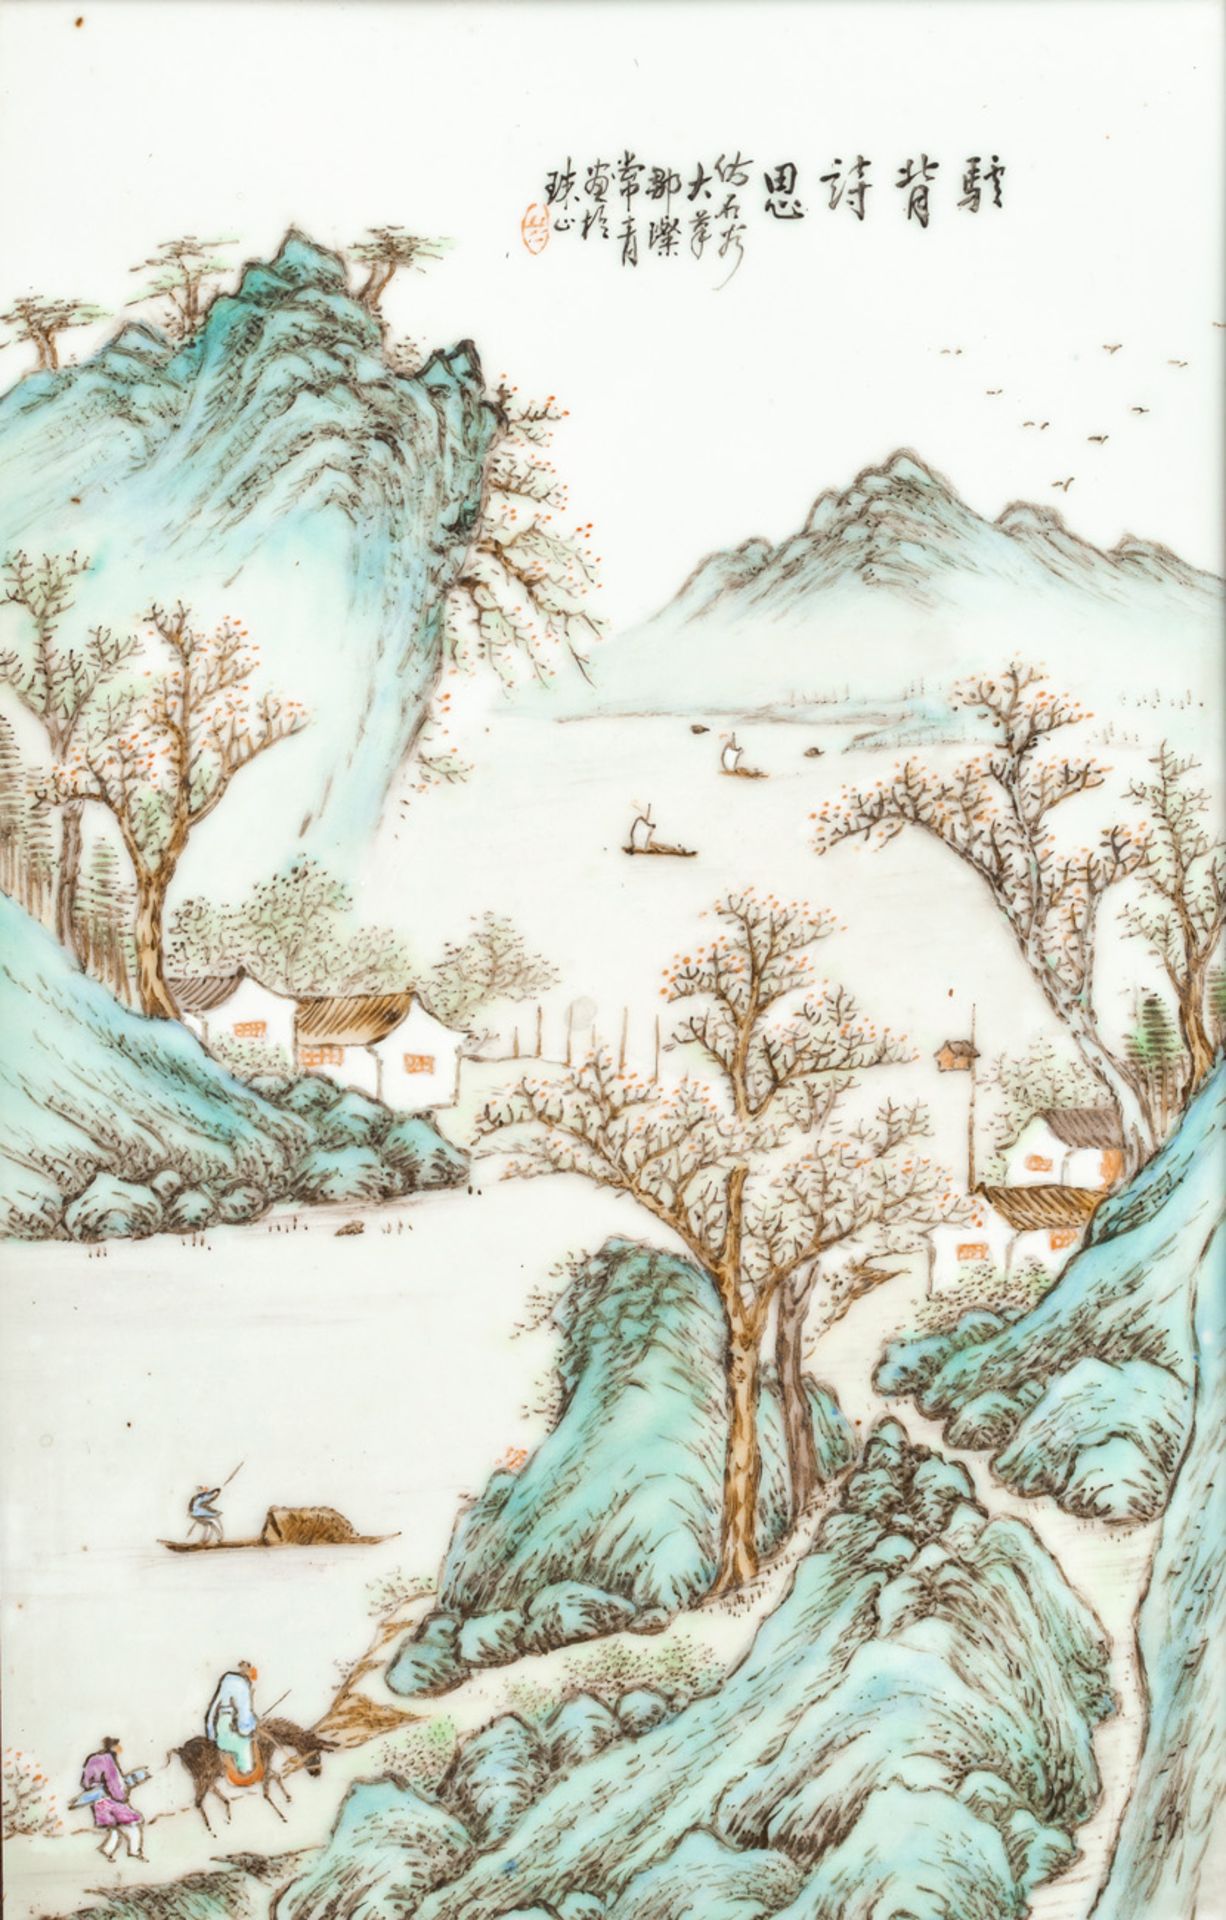 A PAIR OF SMALL PORCELAIN TILES PATINTED WITH FINE POLYCHROME LANDSCAPE DEPICTIONS - Image 4 of 5